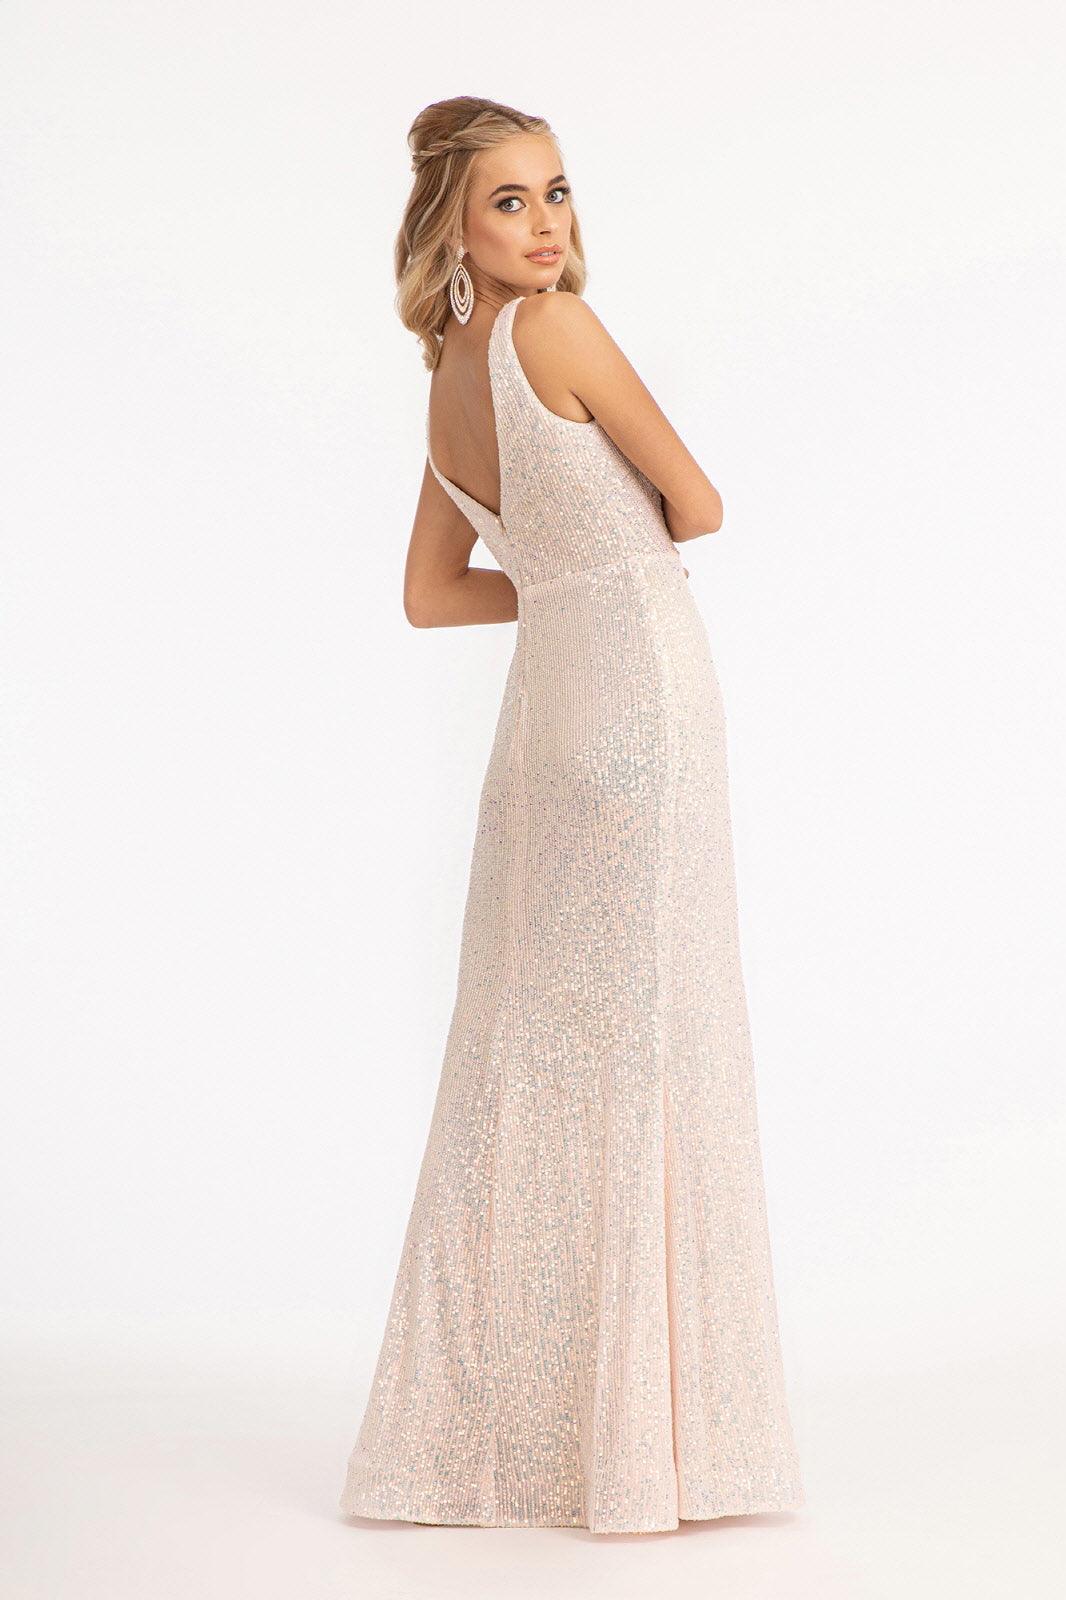 Prom Long Formal Sleeveless Evening Dress - The Dress Outlet